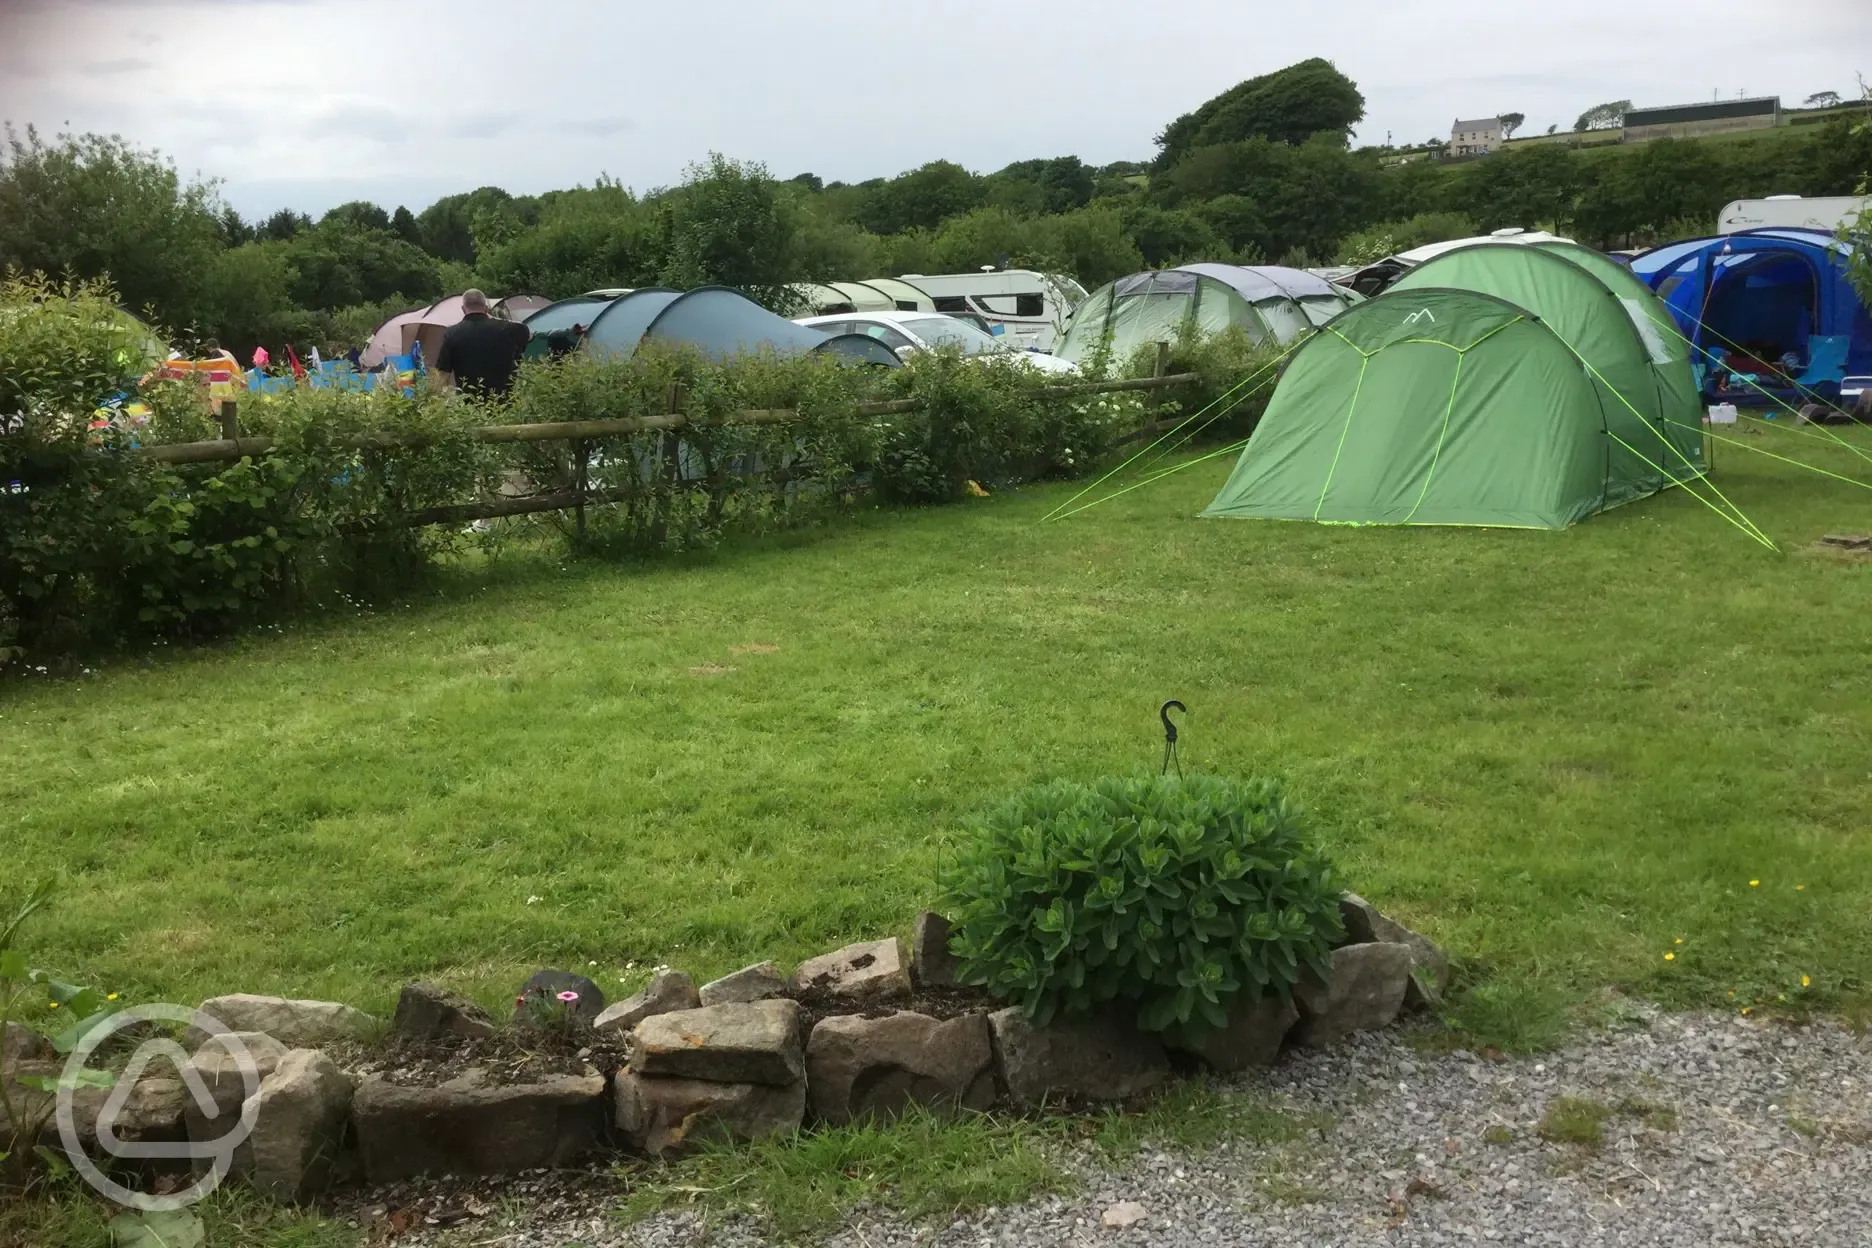 A busy weekend on the campsite 